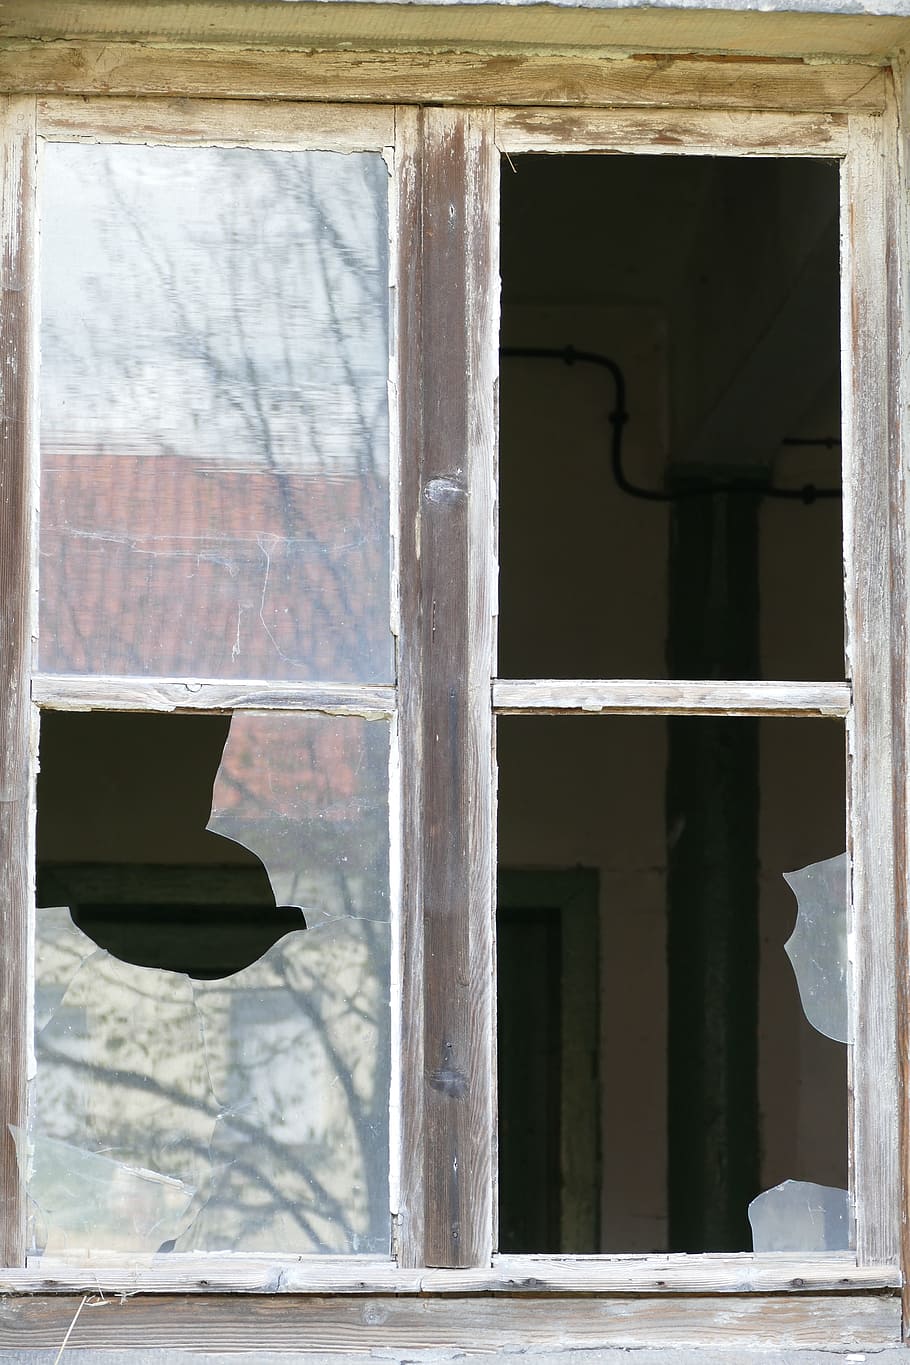 Ruin, Decay, Window, Farm, Glass, mirroring, glass - material, house, damaged, abandoned